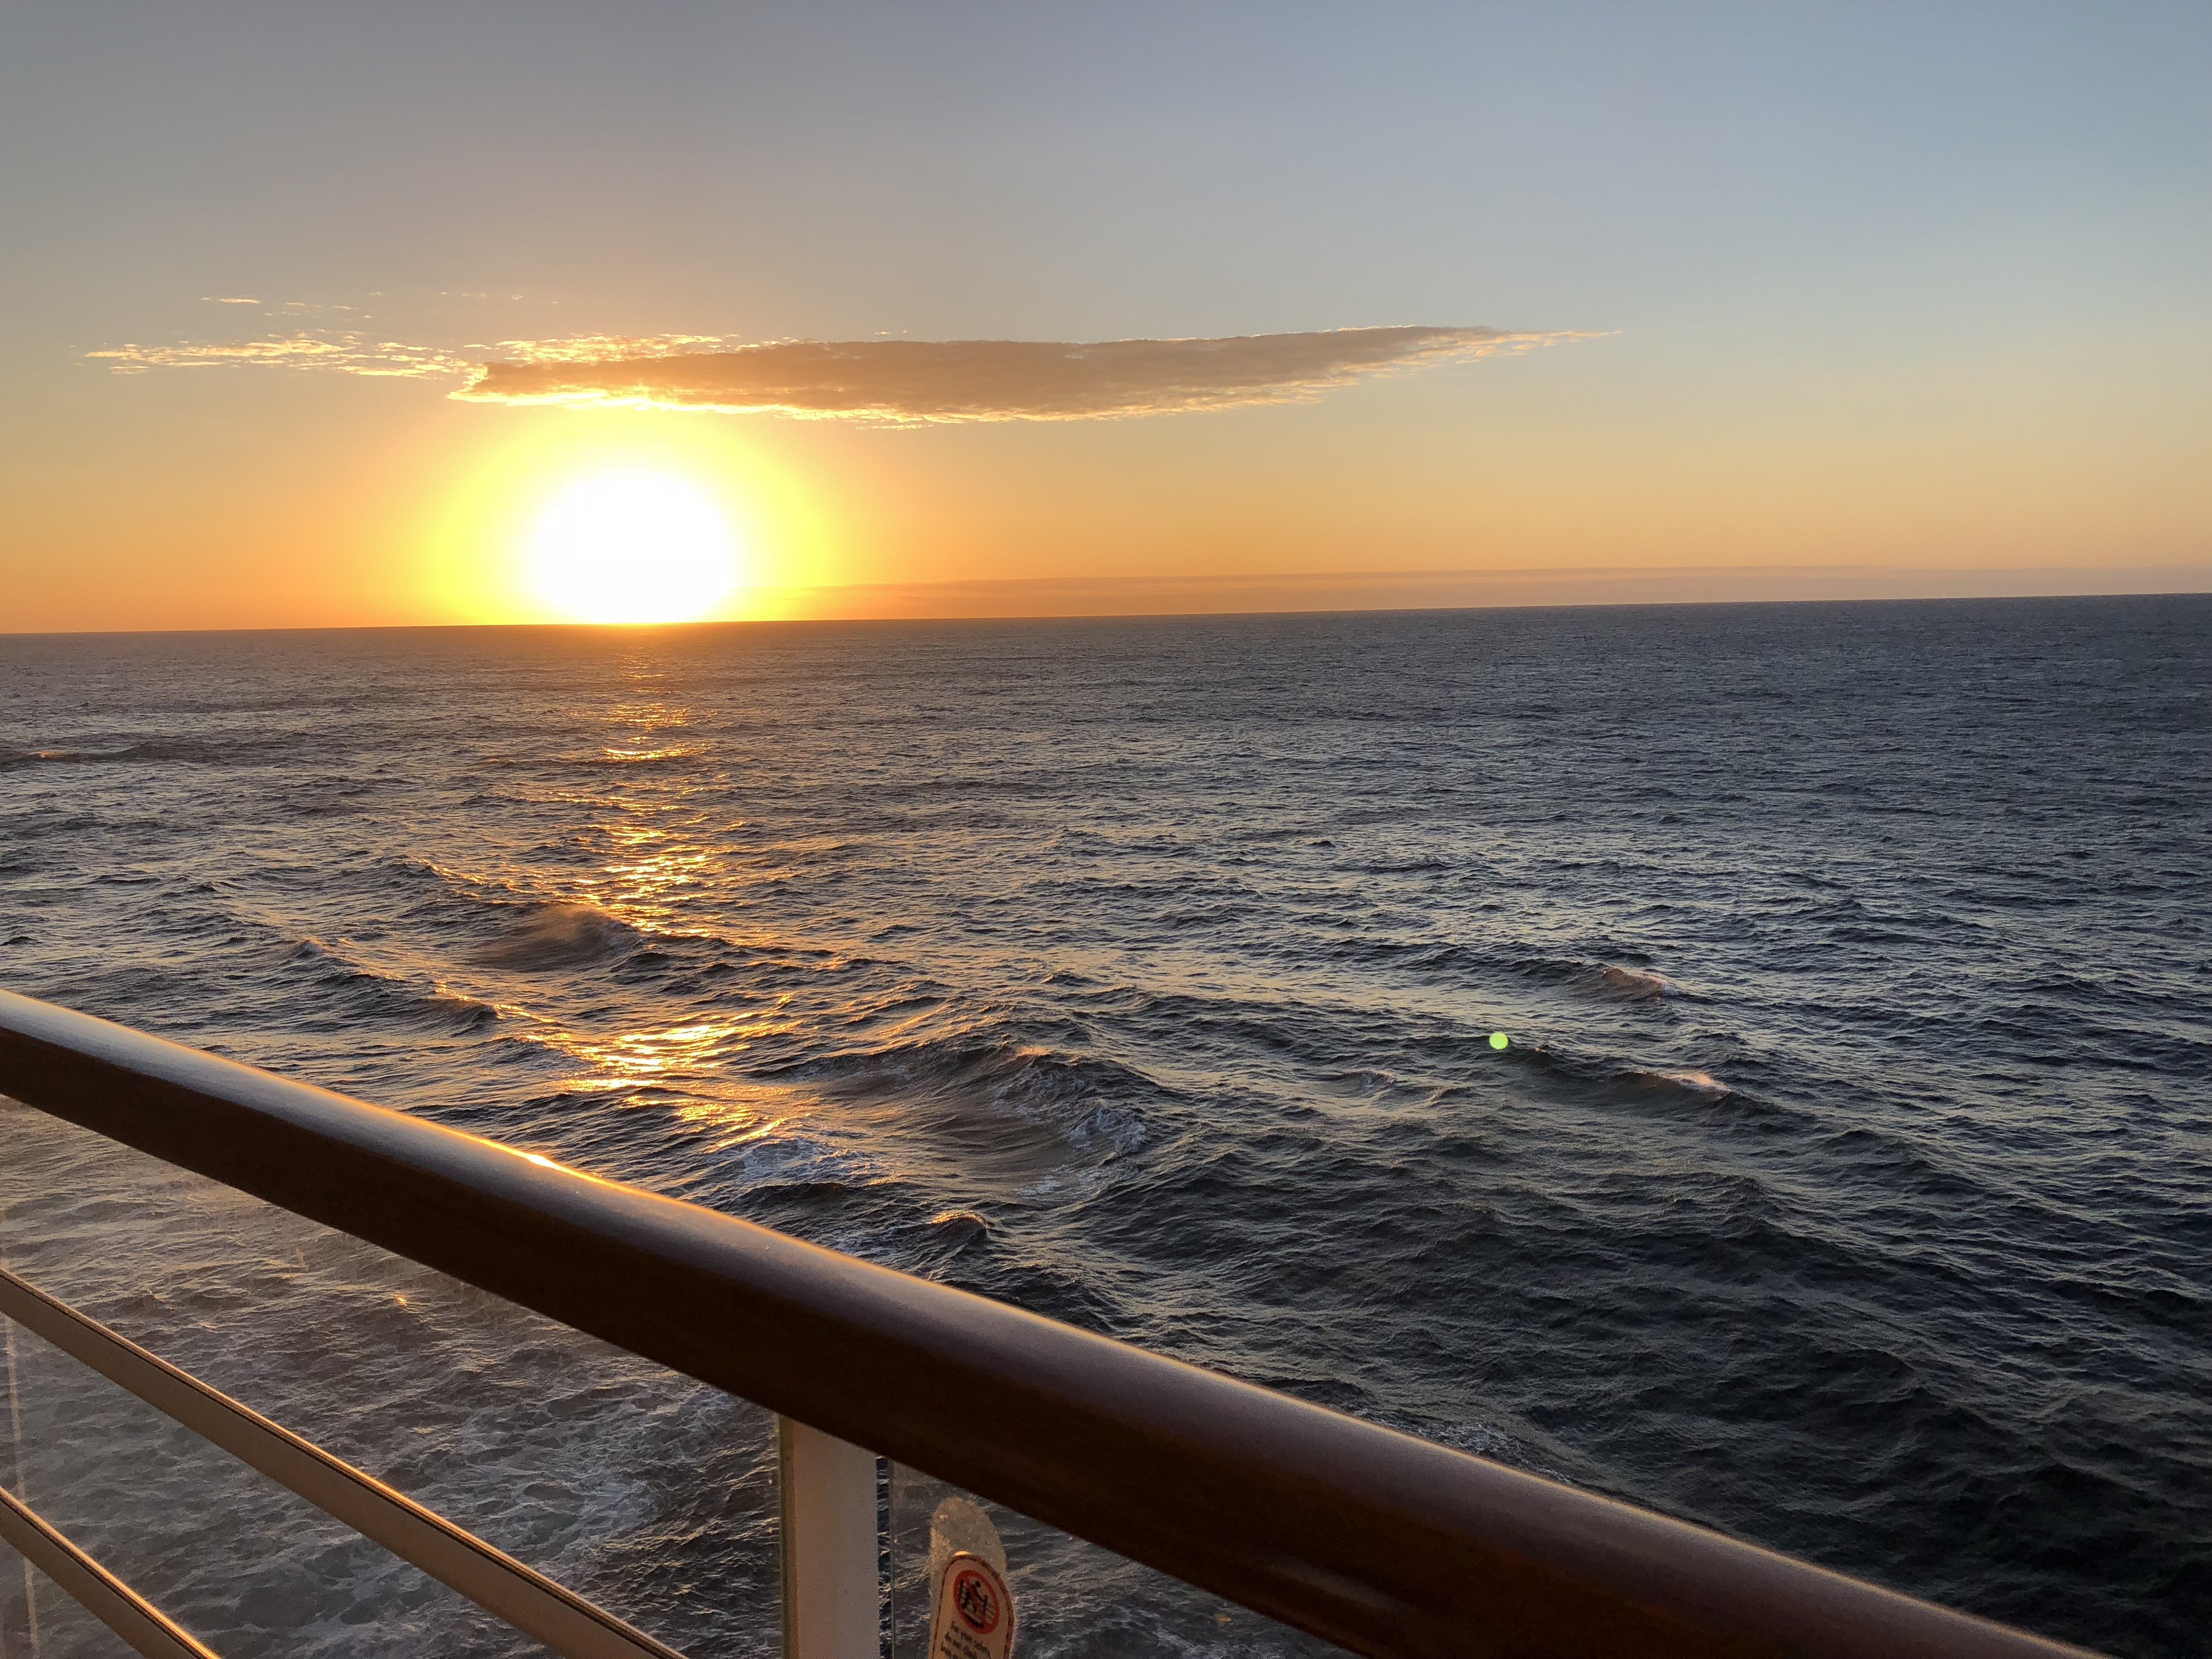 A sunset seen from the verandah of a stateroom on a Disney Cruise ship